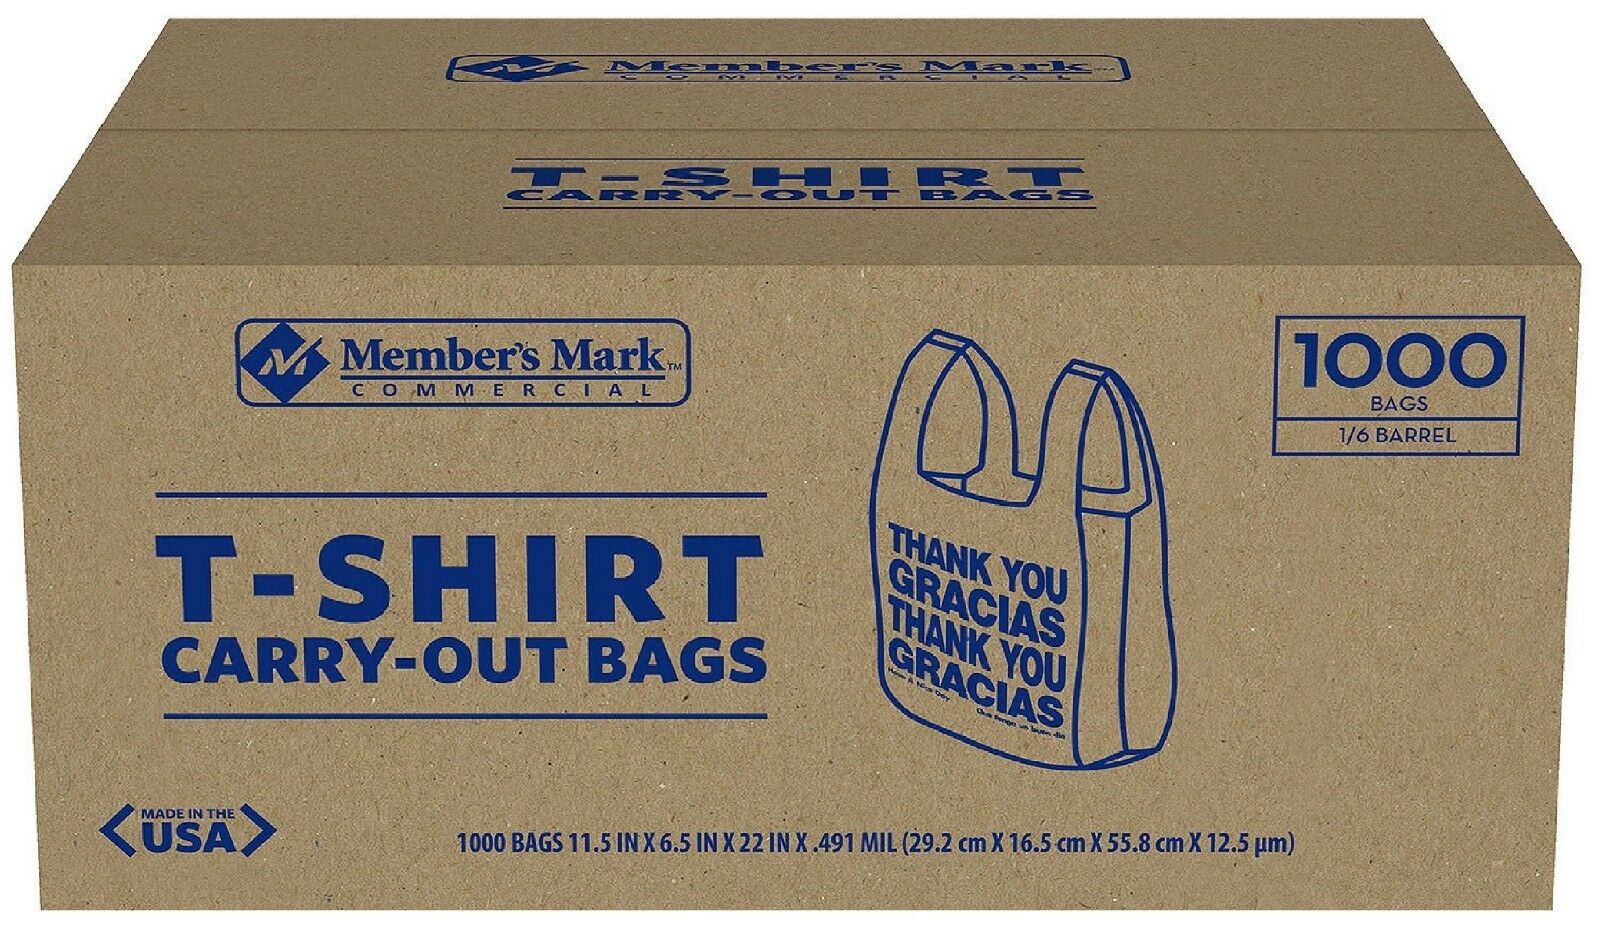 Member's Mark T-shirt Carry-out Bags 1,000 Ct Grocery Stores, Convenience Stores